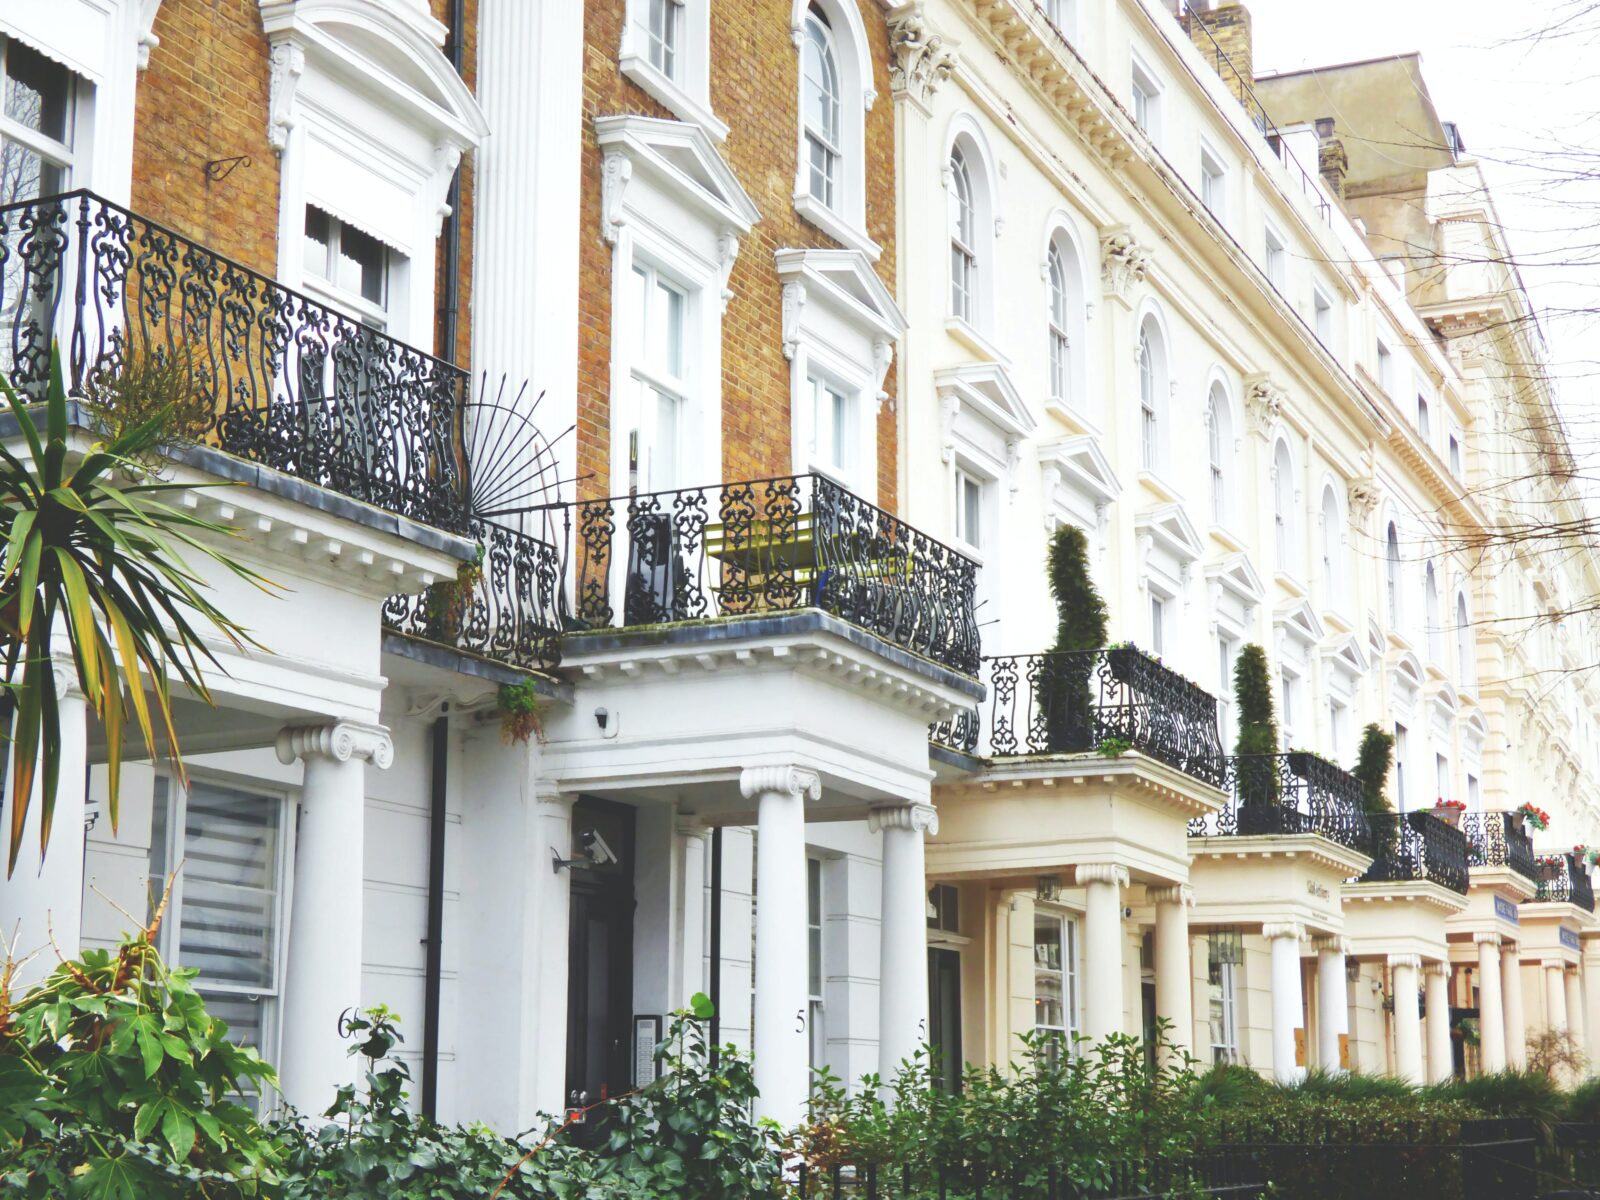 row homes in a burrough of london, united kingdom, with balconies and covered porches